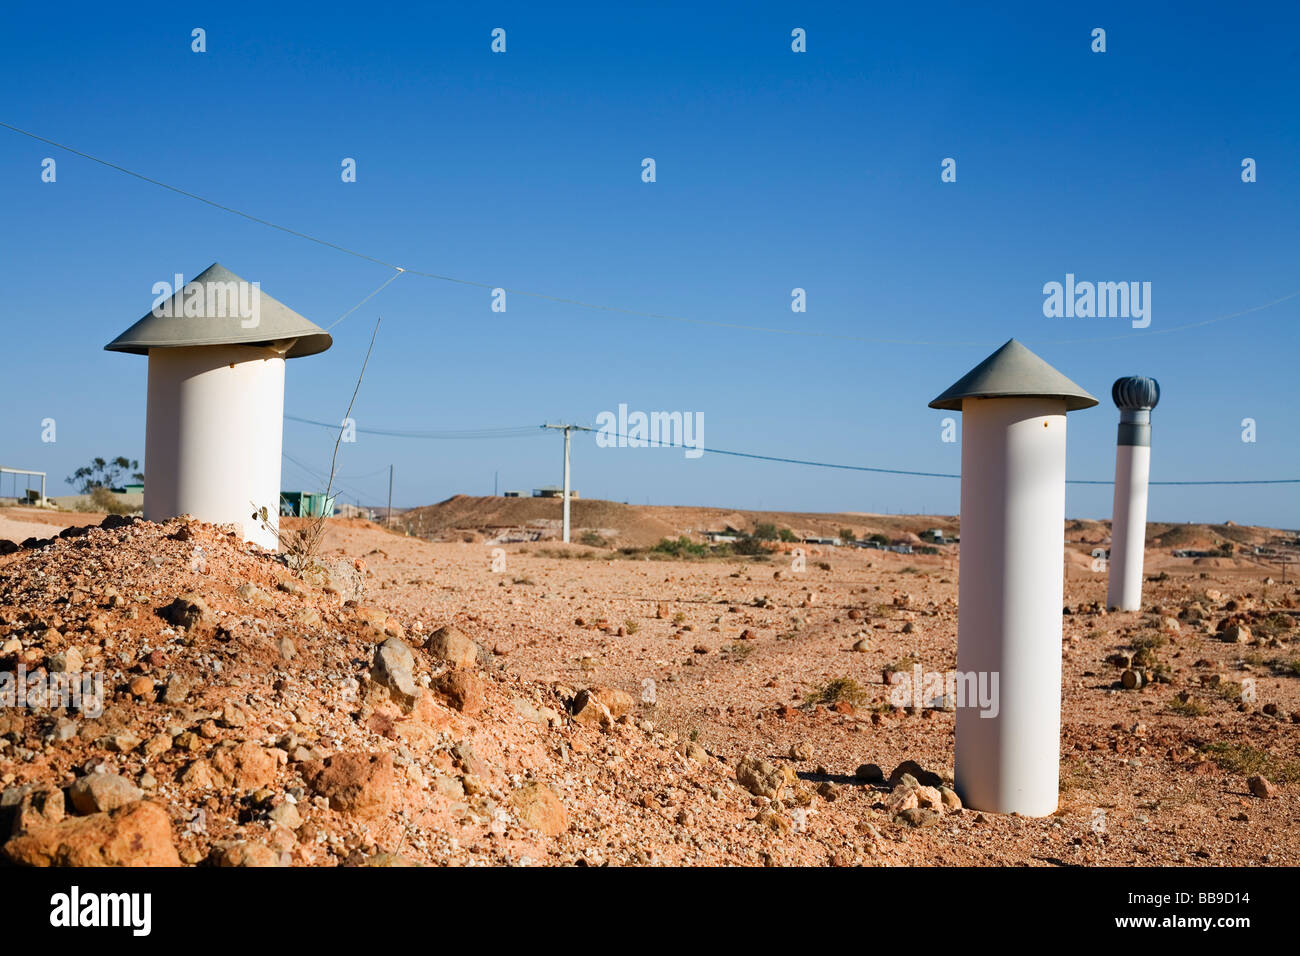 Air vents on the surface provide ventilation for underground homes, known as dugouts.  Coober Pedy, South Australia, AUSTRALIA Stock Photo